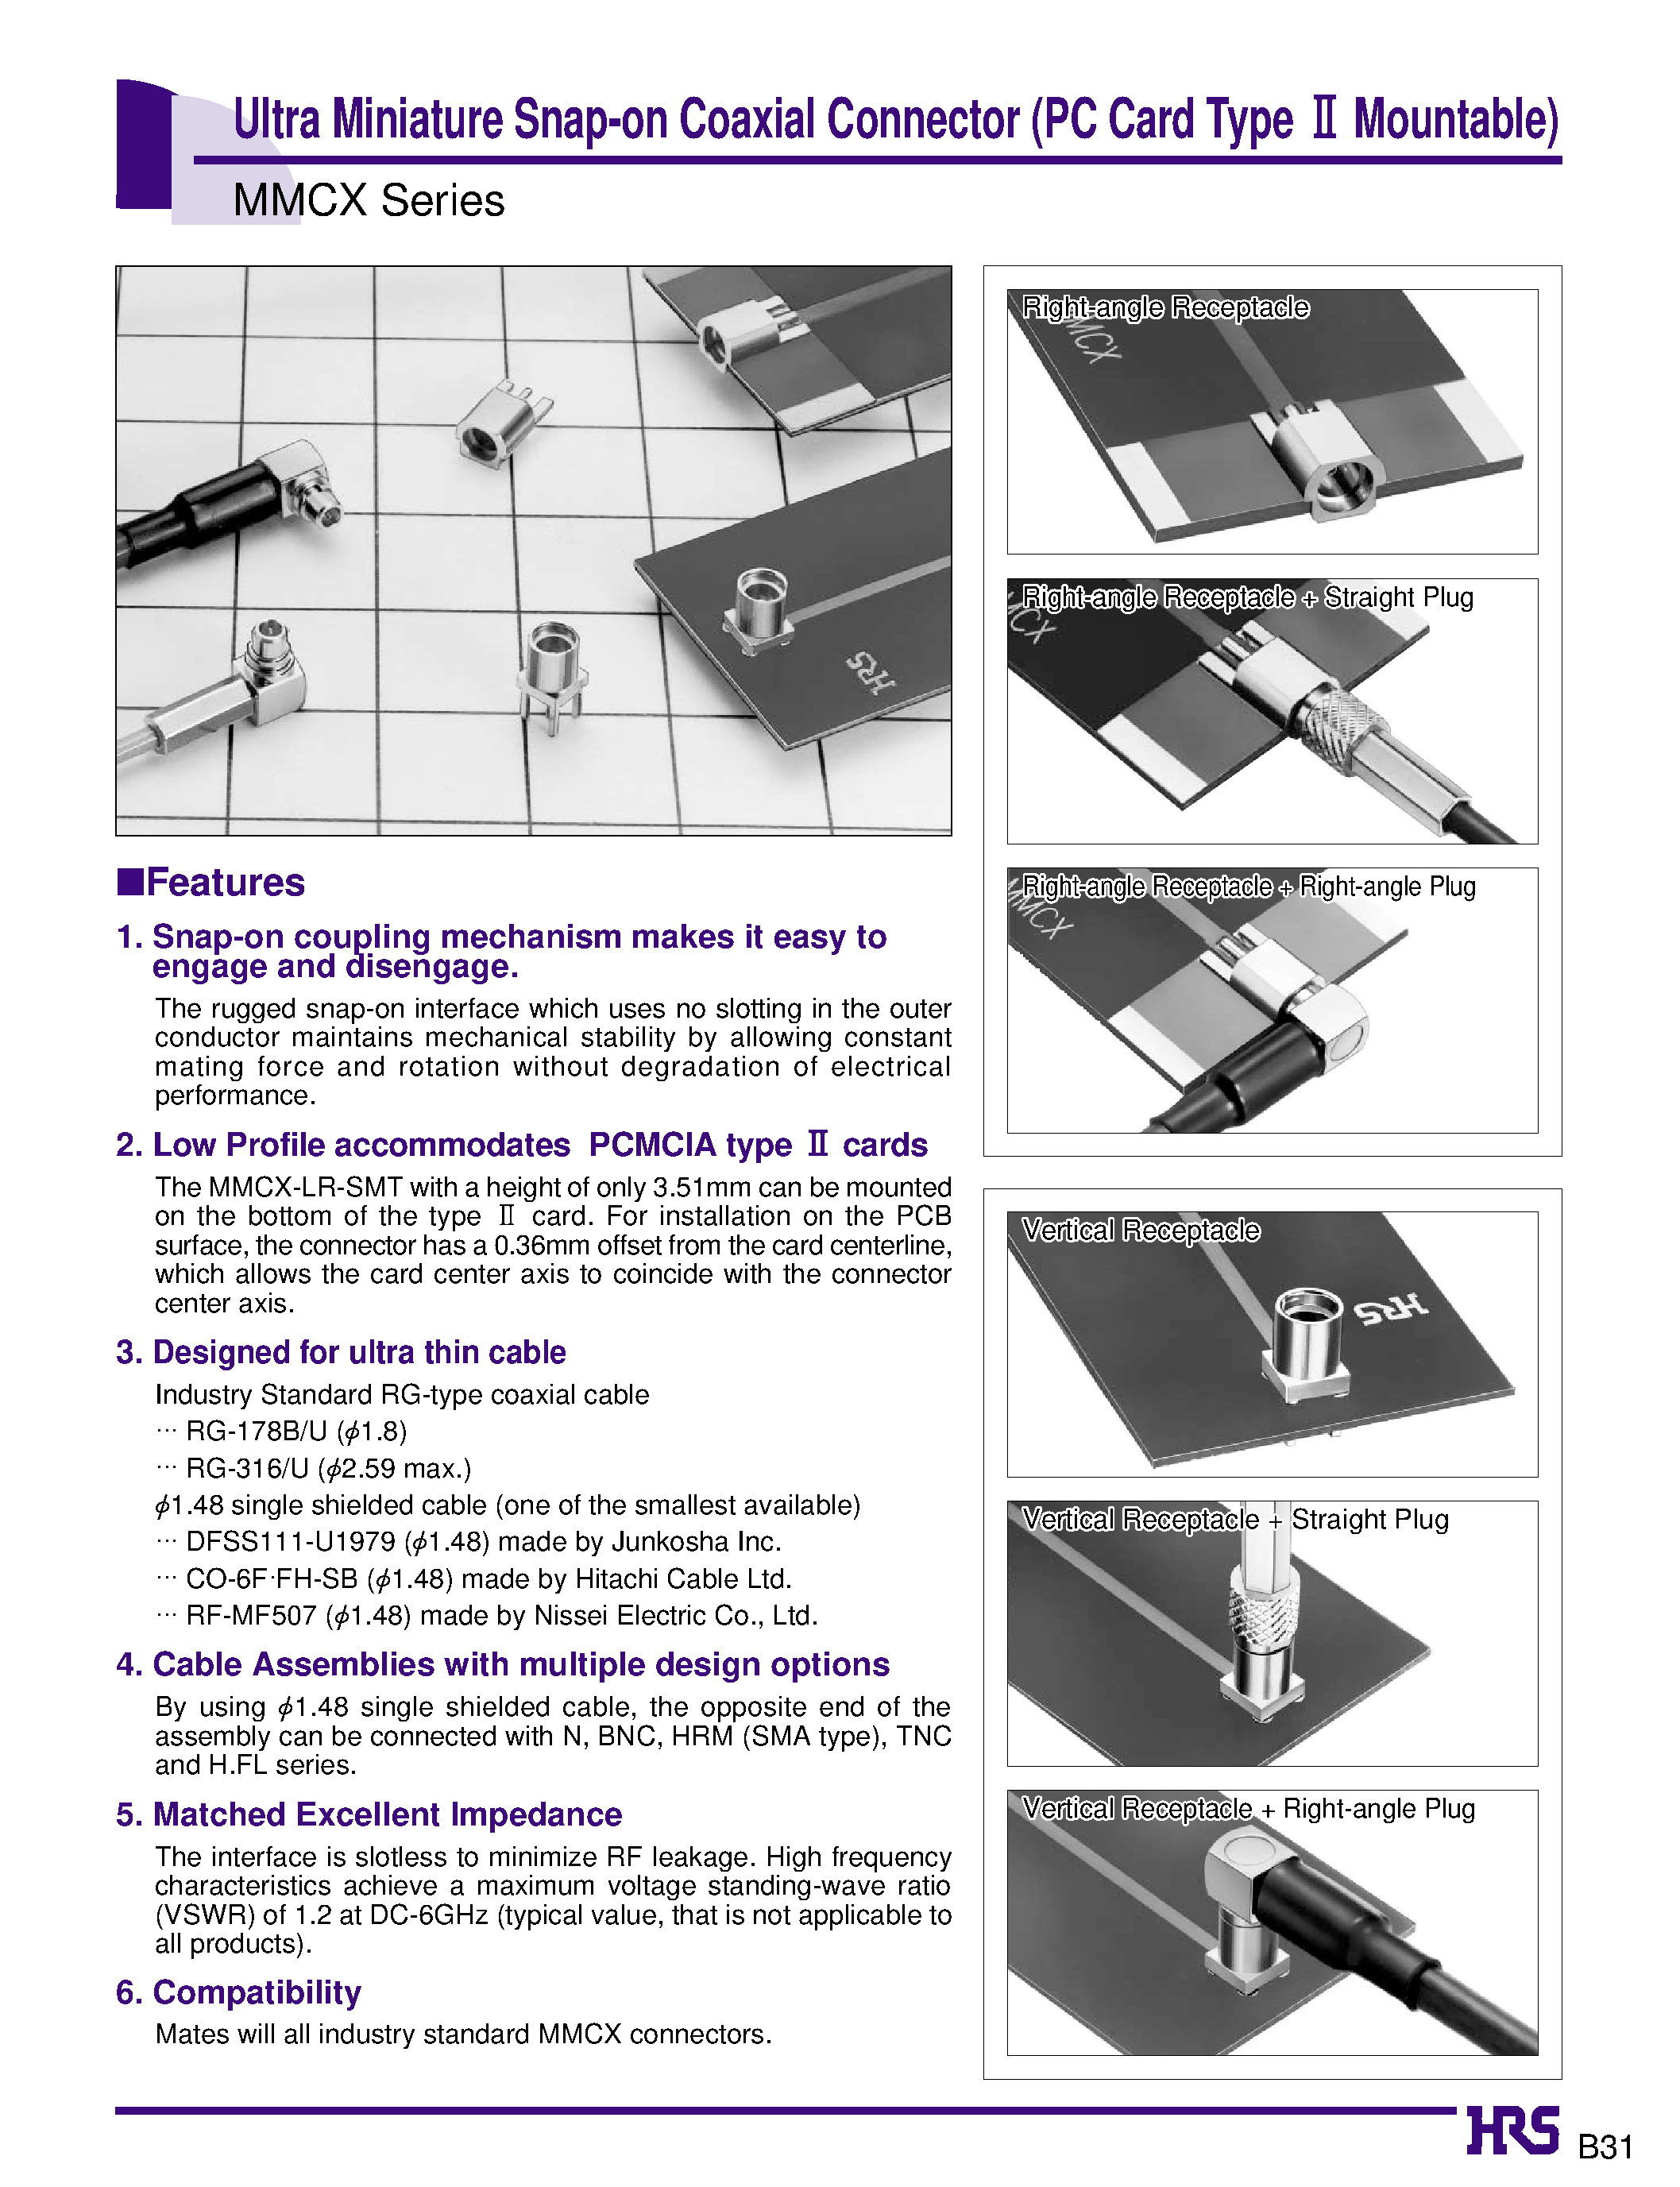 Datasheet MMCX-R-316/U - Ultra Miniature Snap-on Coaxial Connector (PC Card Type 2 Mountable) page 1